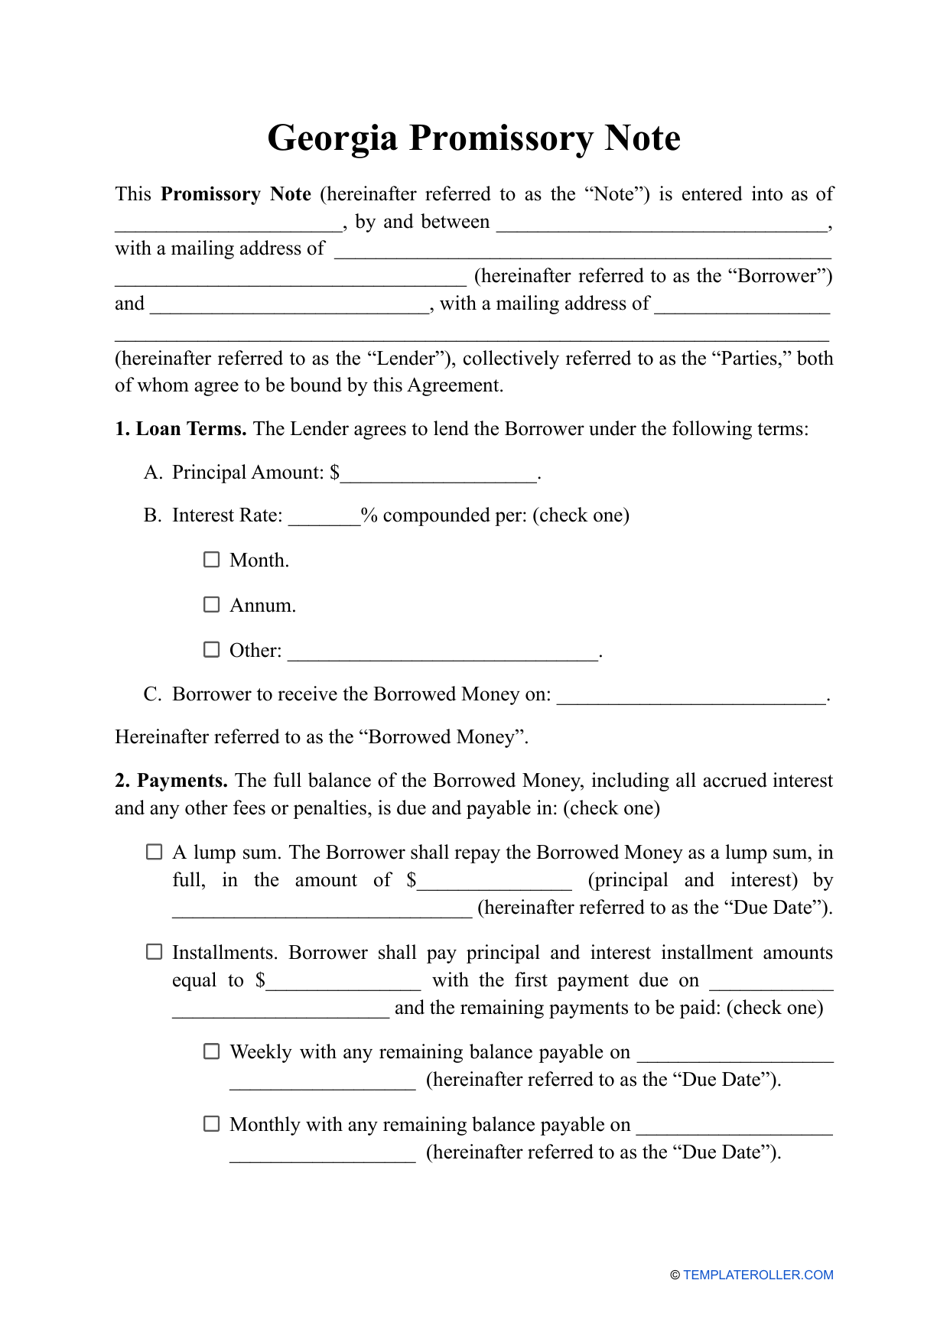 Georgia United States Promissory Note Template Download Printable PDF Templateroller